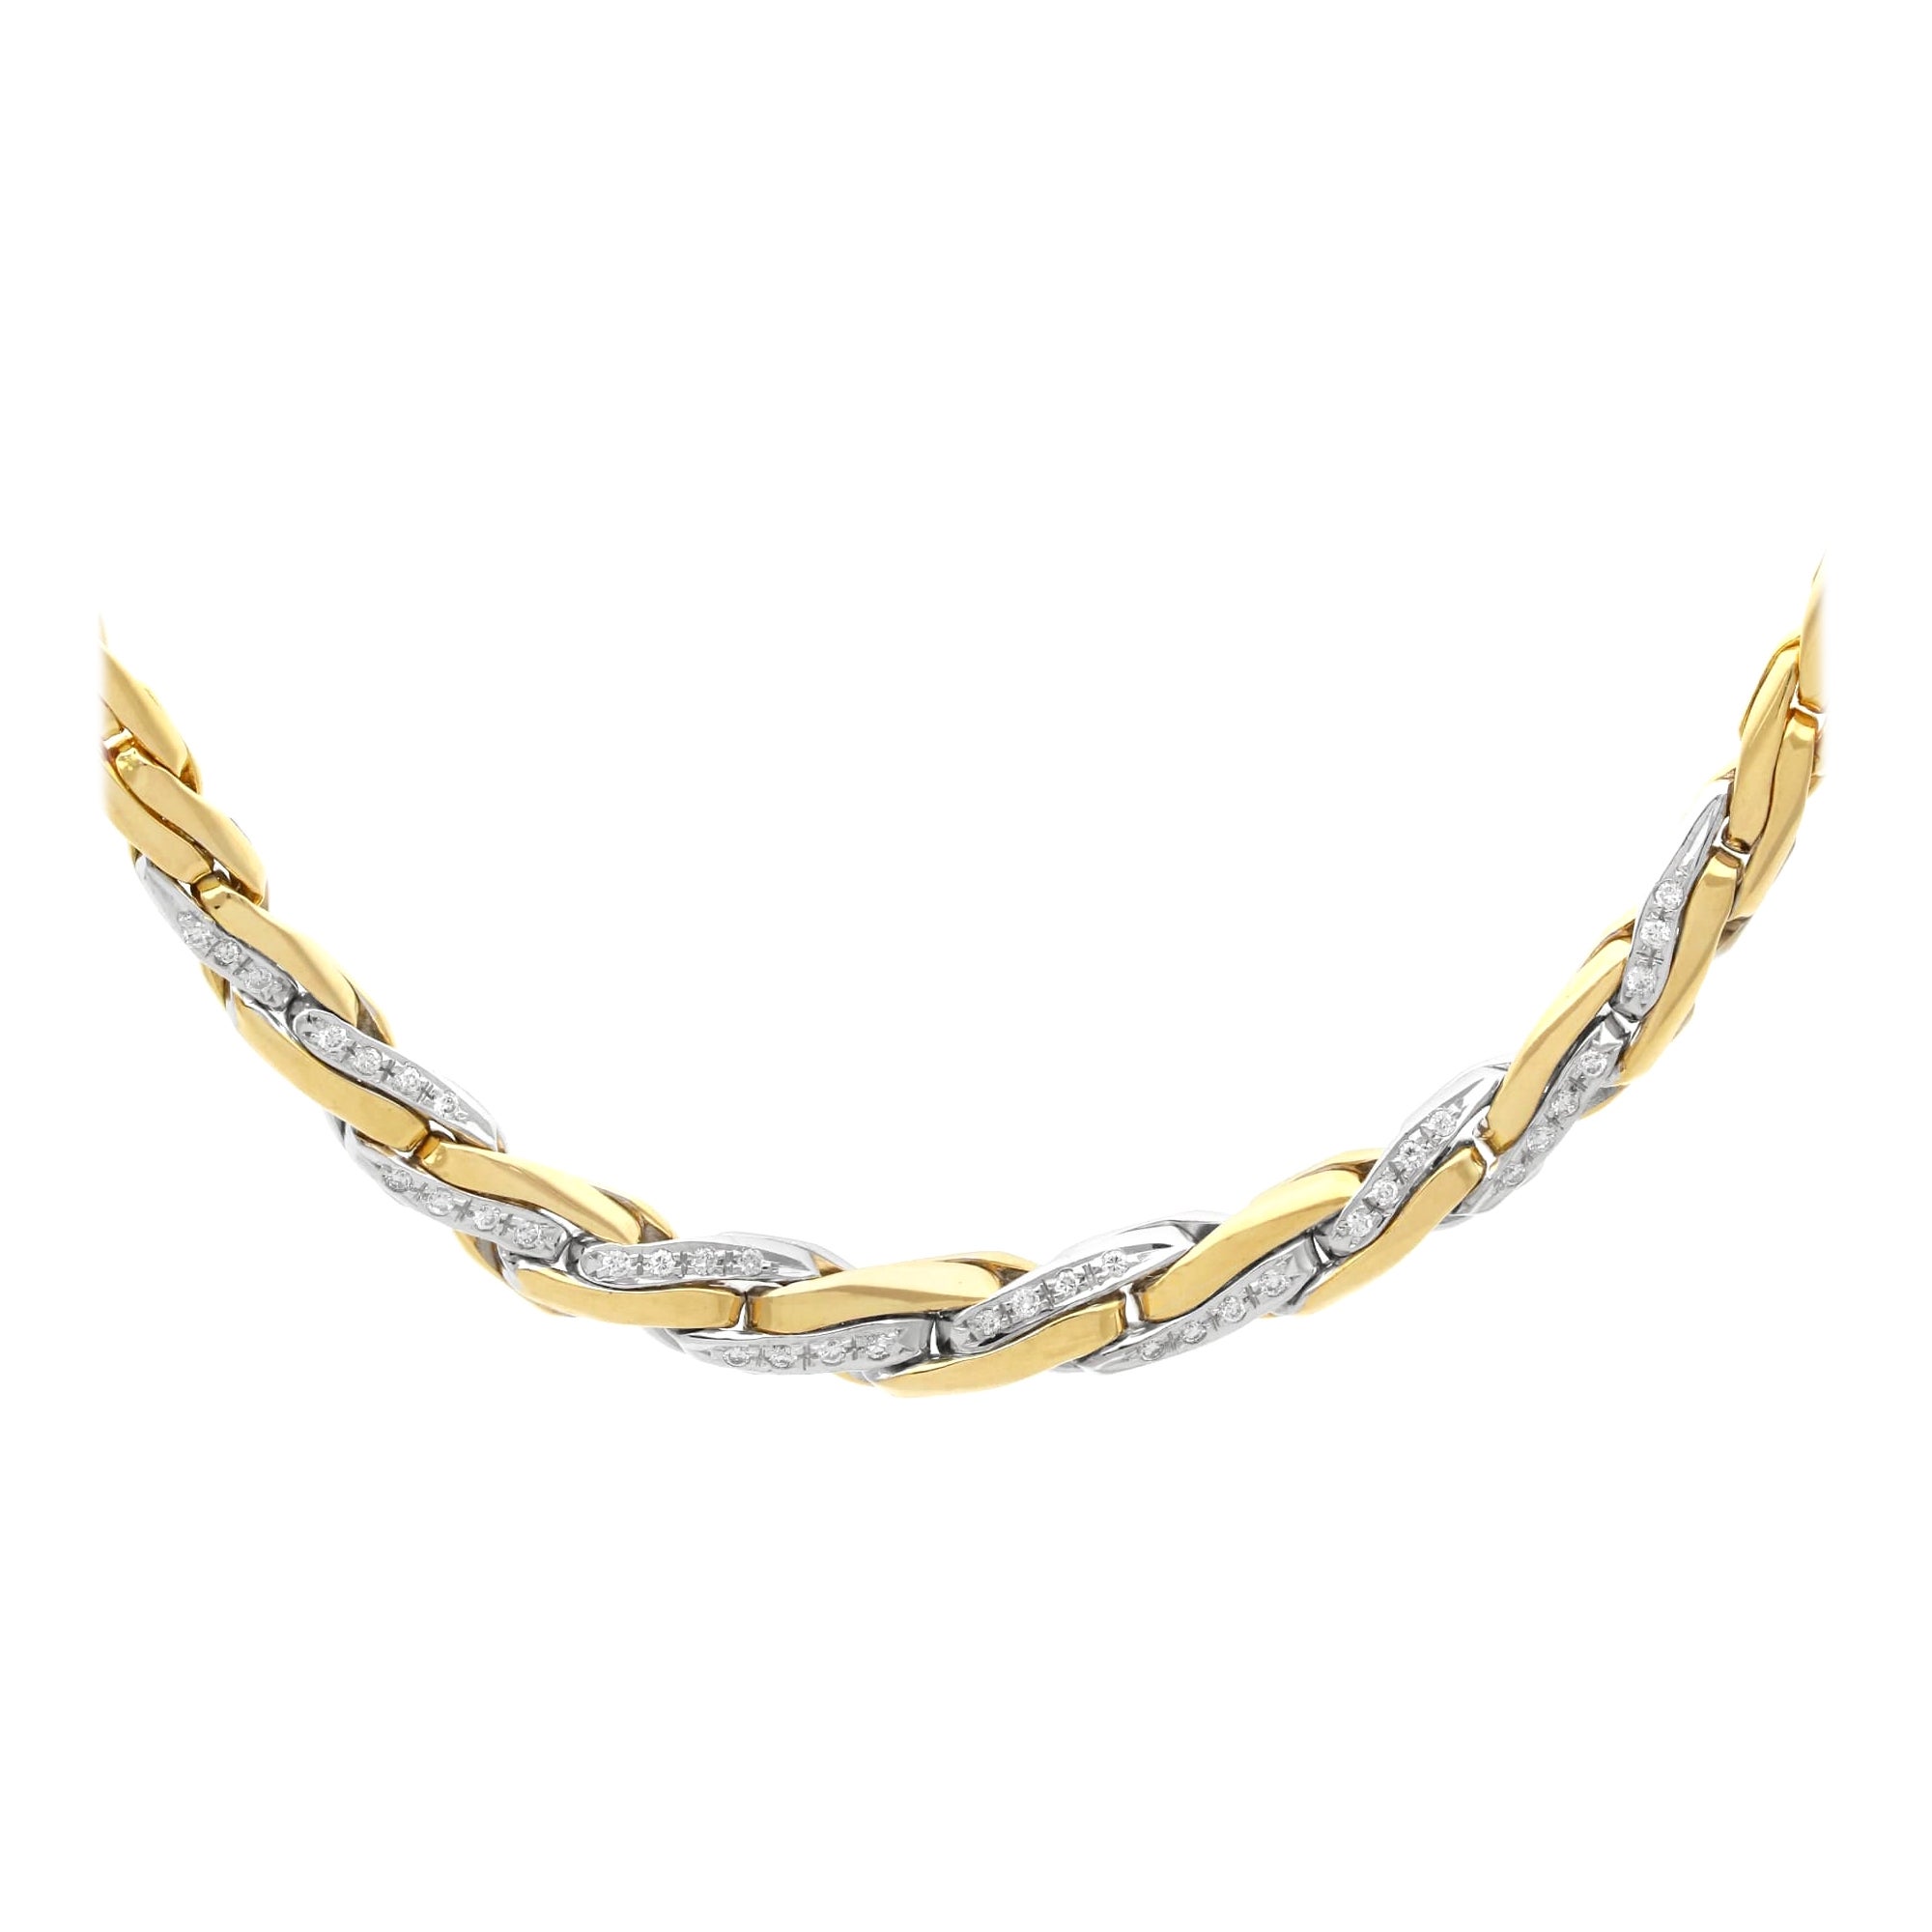 Vintage 0.62 Carat Diamond and 18k Yellow Gold Necklace